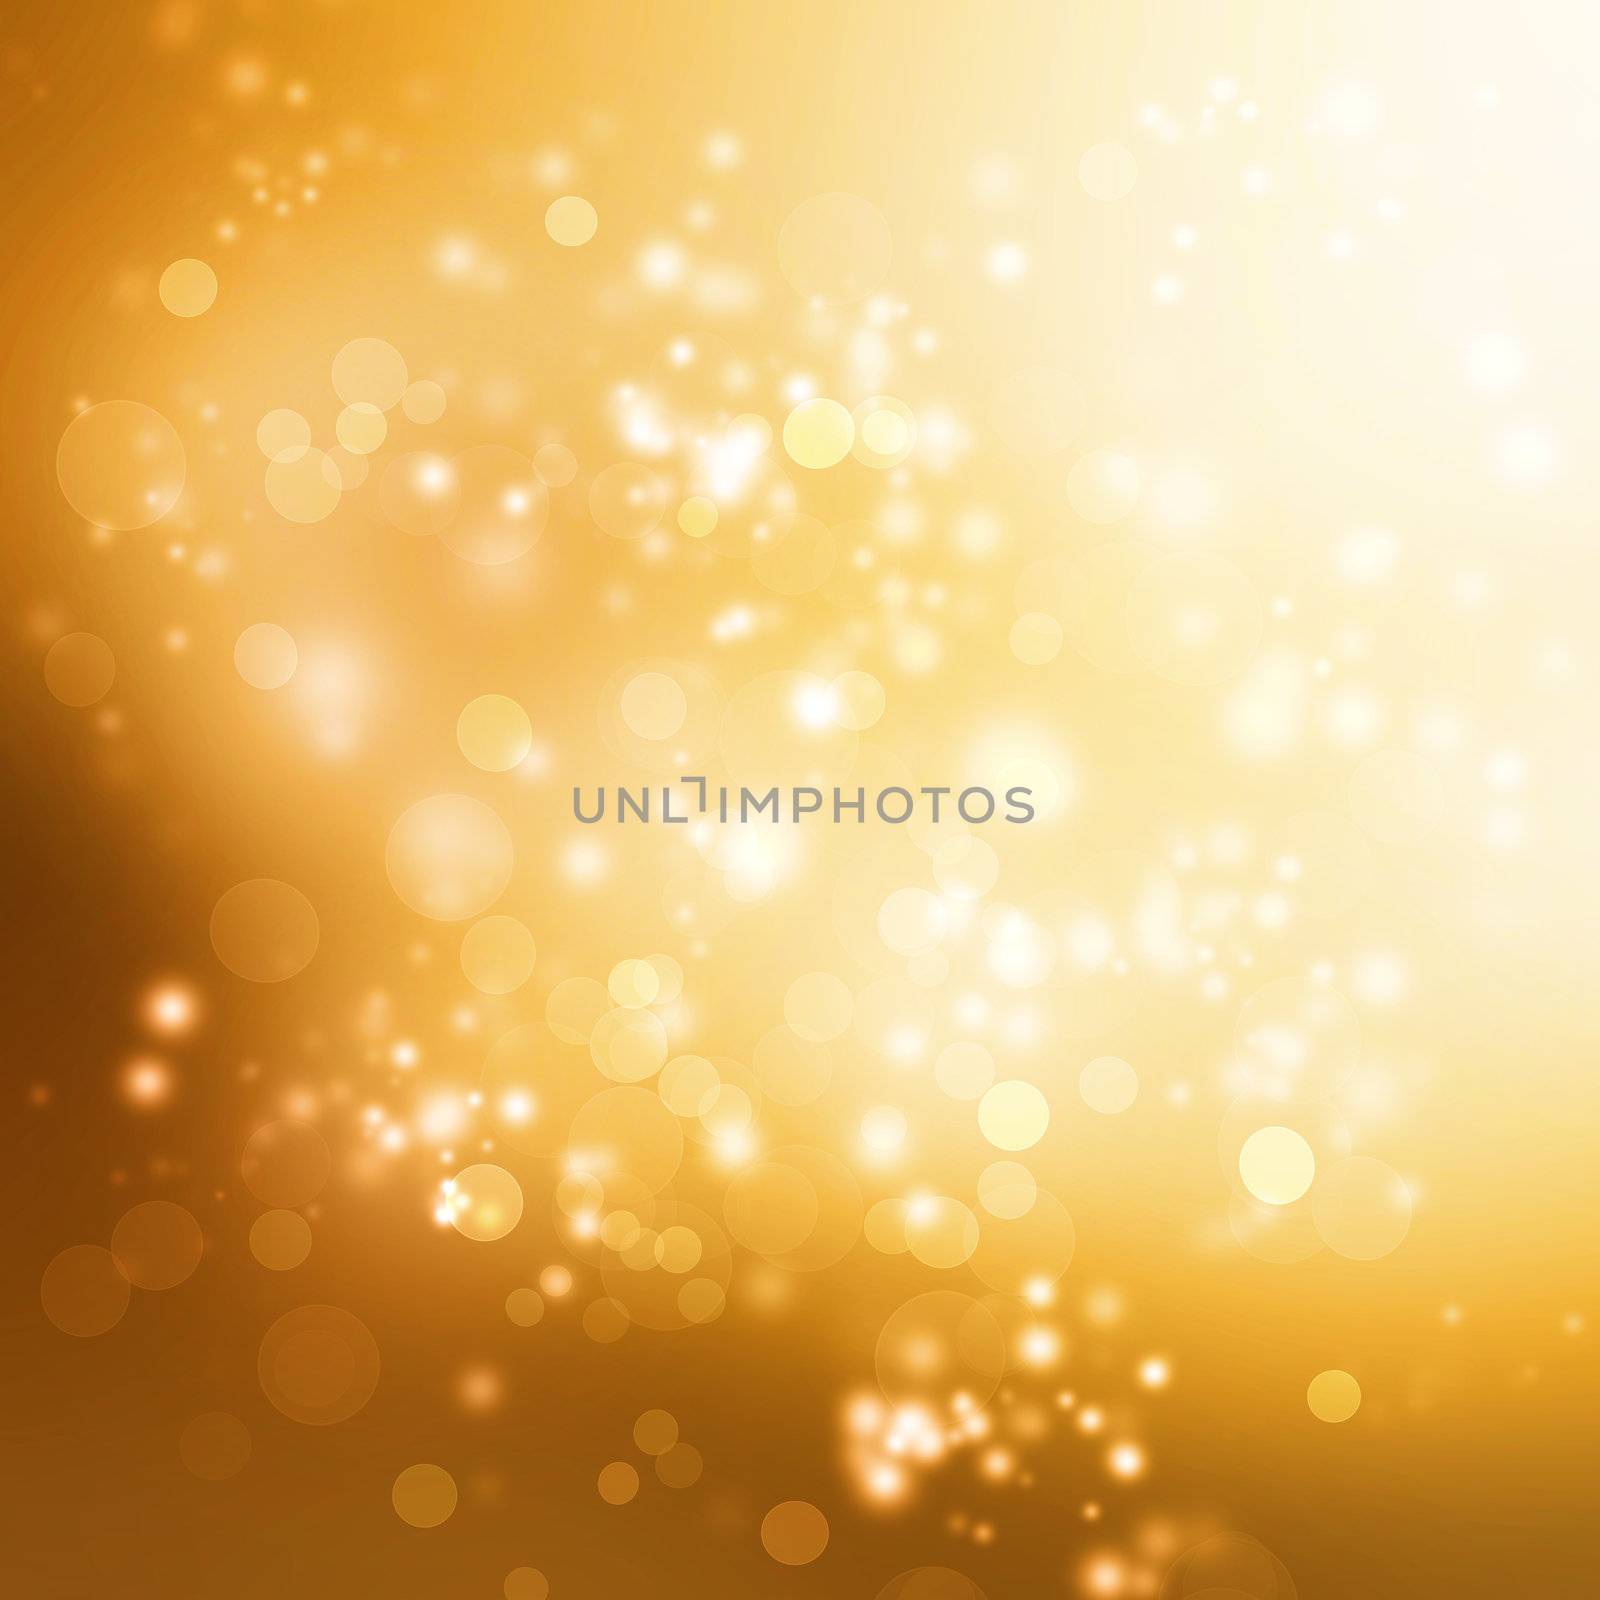 Abstract Lights on Gold Colored Background 